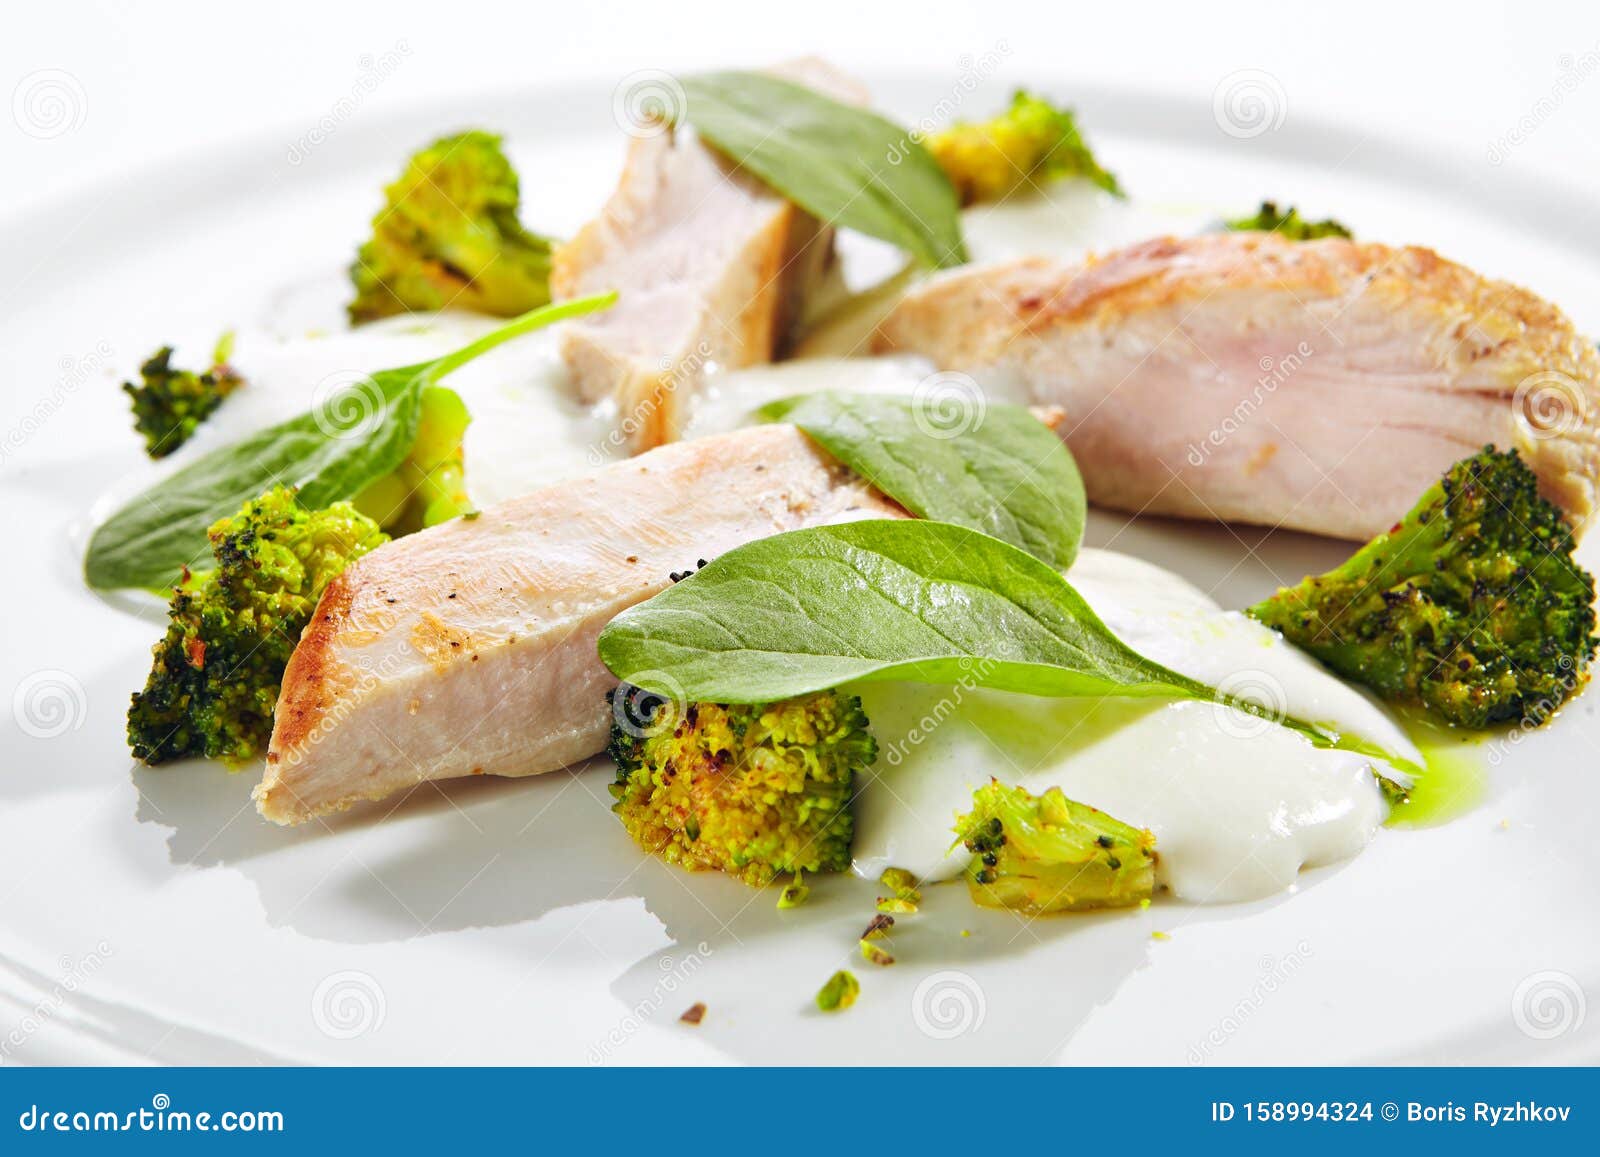 turkey fillet with baked cabbage broccoli and cheese espuma